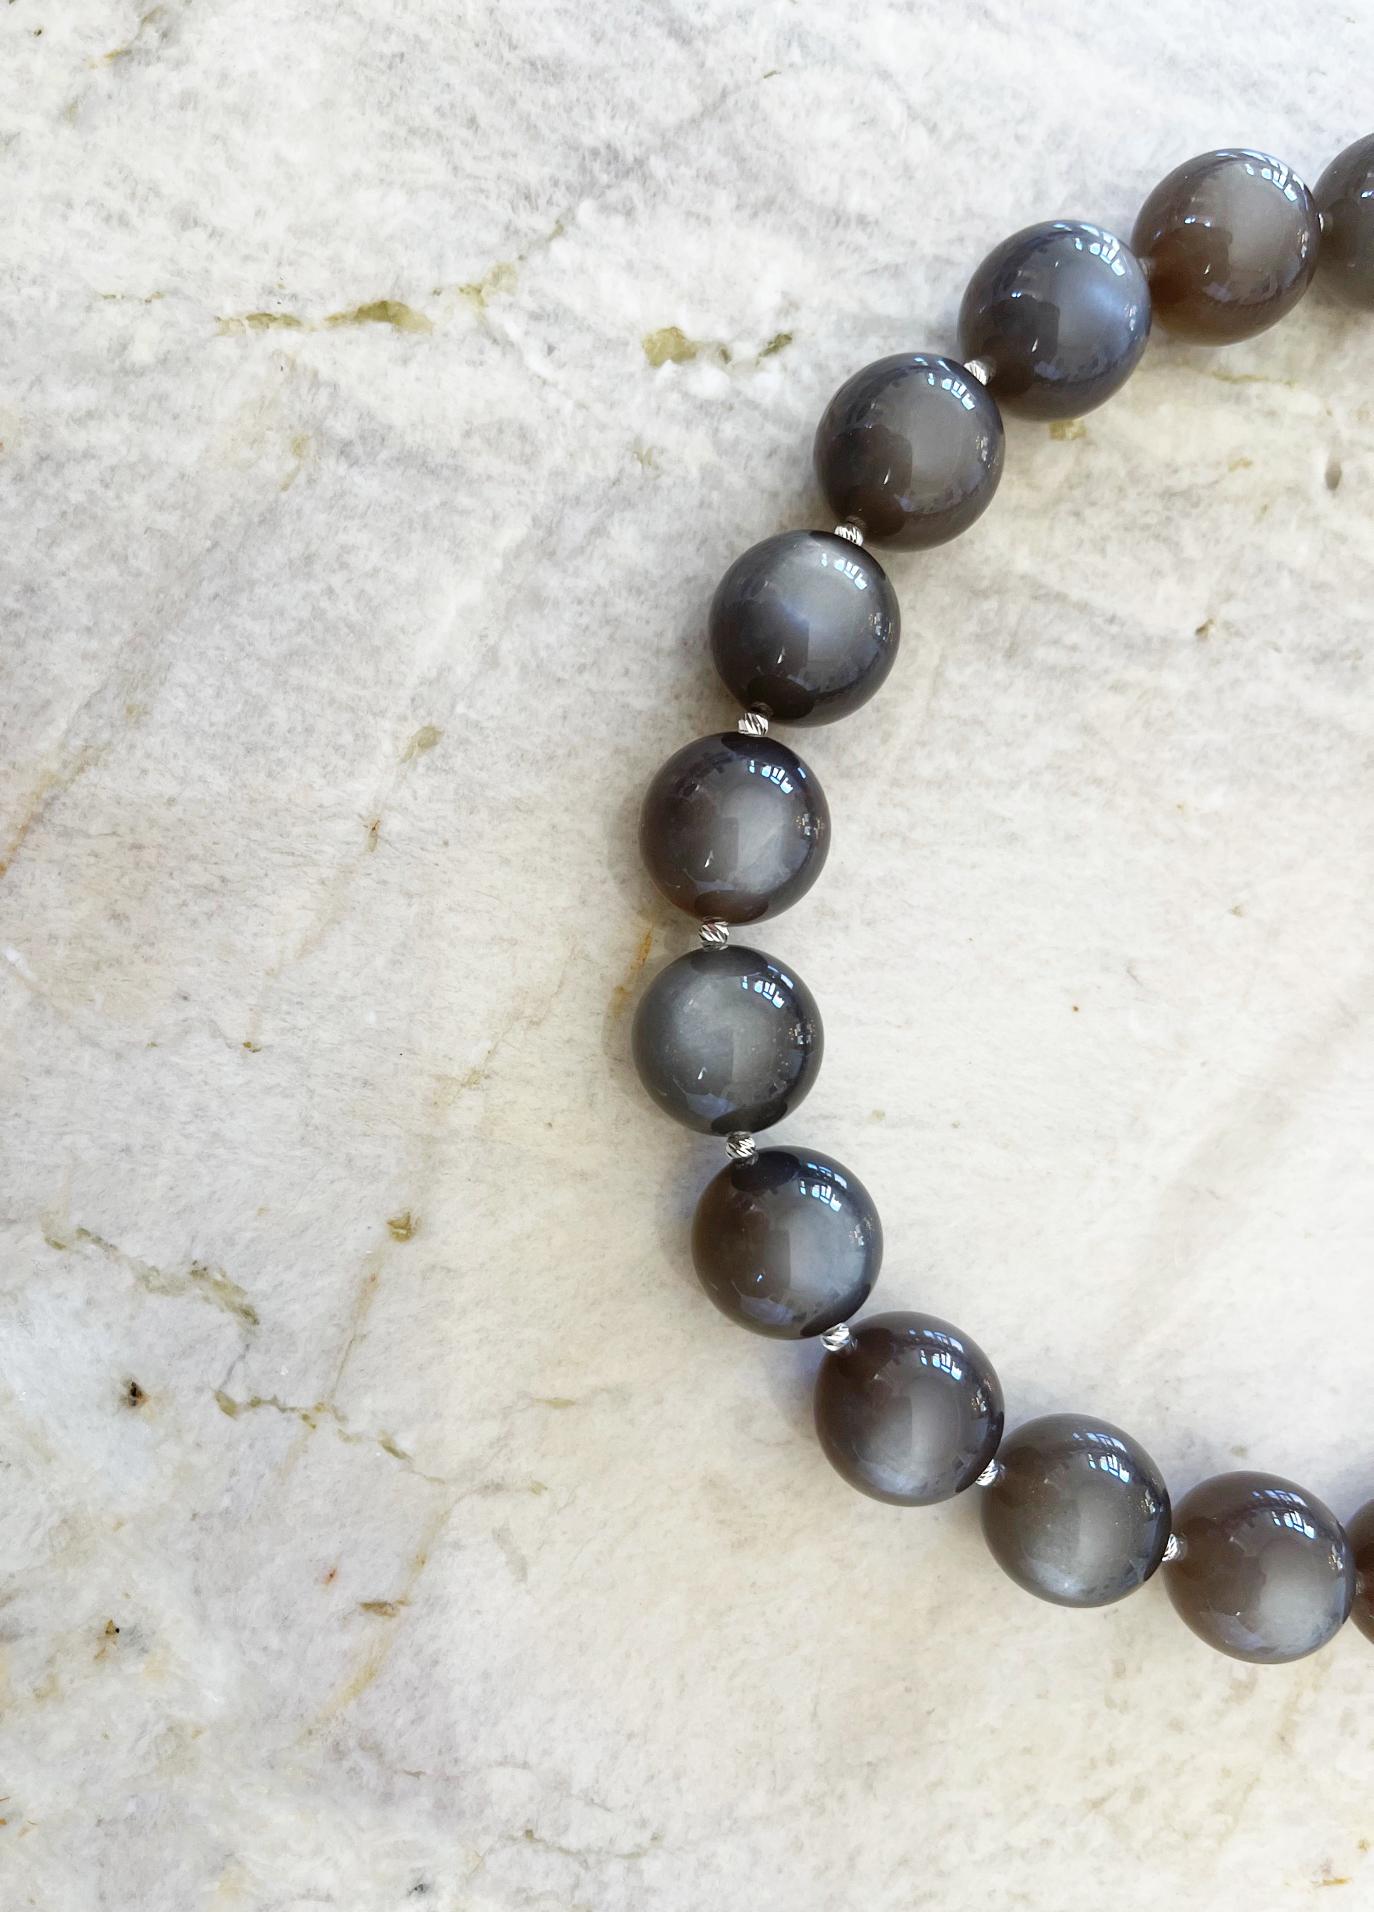 Graphite Gray Moonstone 16mm Round Beaded Necklace with Handmade Toggle Clasp 2